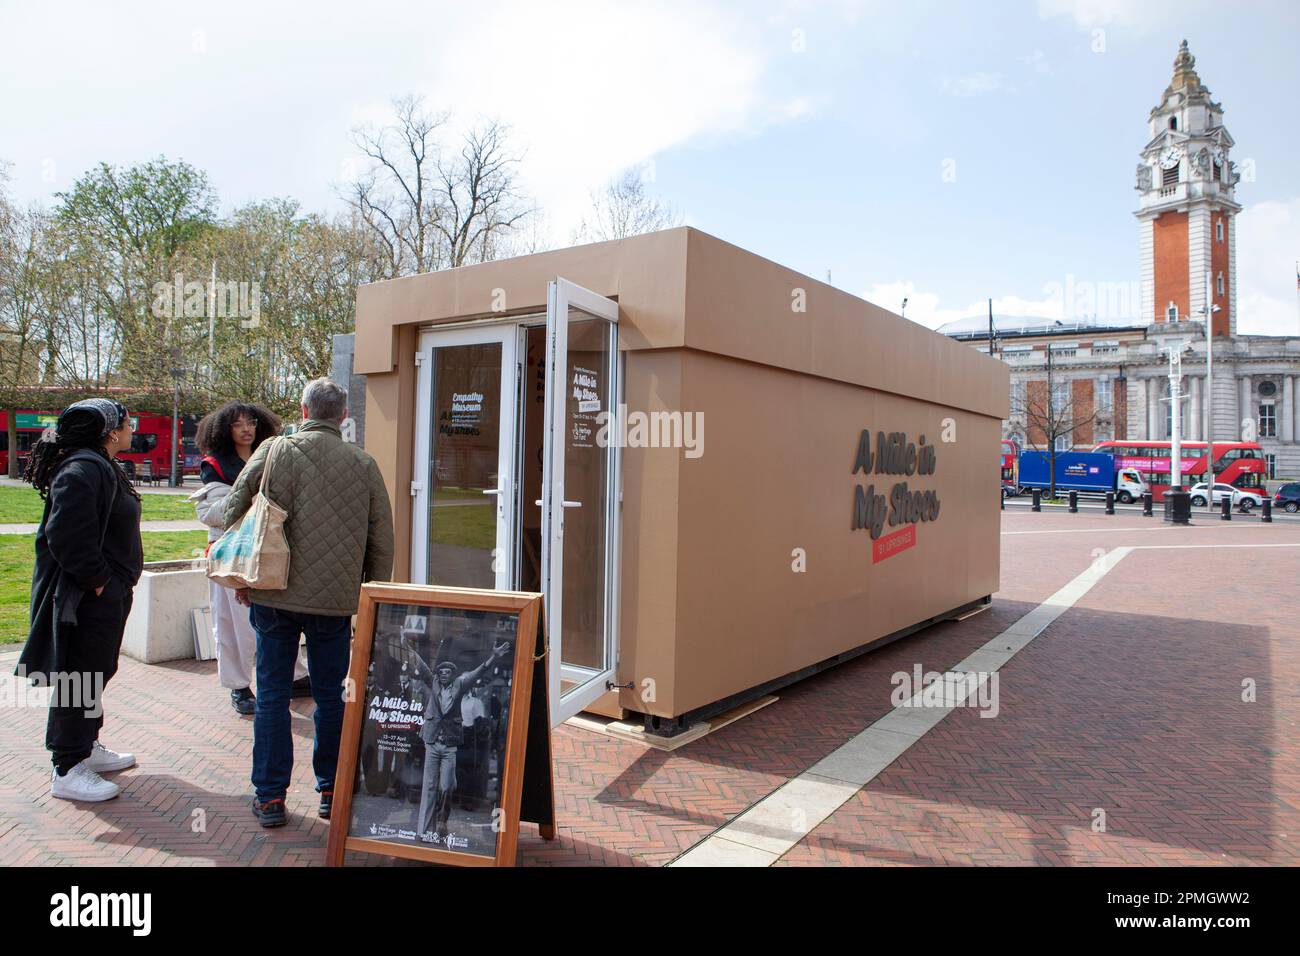 London, UK, 13 April 2023: a giant shoe box has arrived in Windrush Square, Brixton, containing a pop-up exhibition 'Walk a Mile in My Shoes' by the Empathy Museum. Visitors choose a pair of shoes and listen to a recording of the shoes owner discussing their experience of the 1981 Brixton uprising, or other uprisings in Bristol and Liverpool in that era. Anna Watson/Alamy Live News Stock Photo